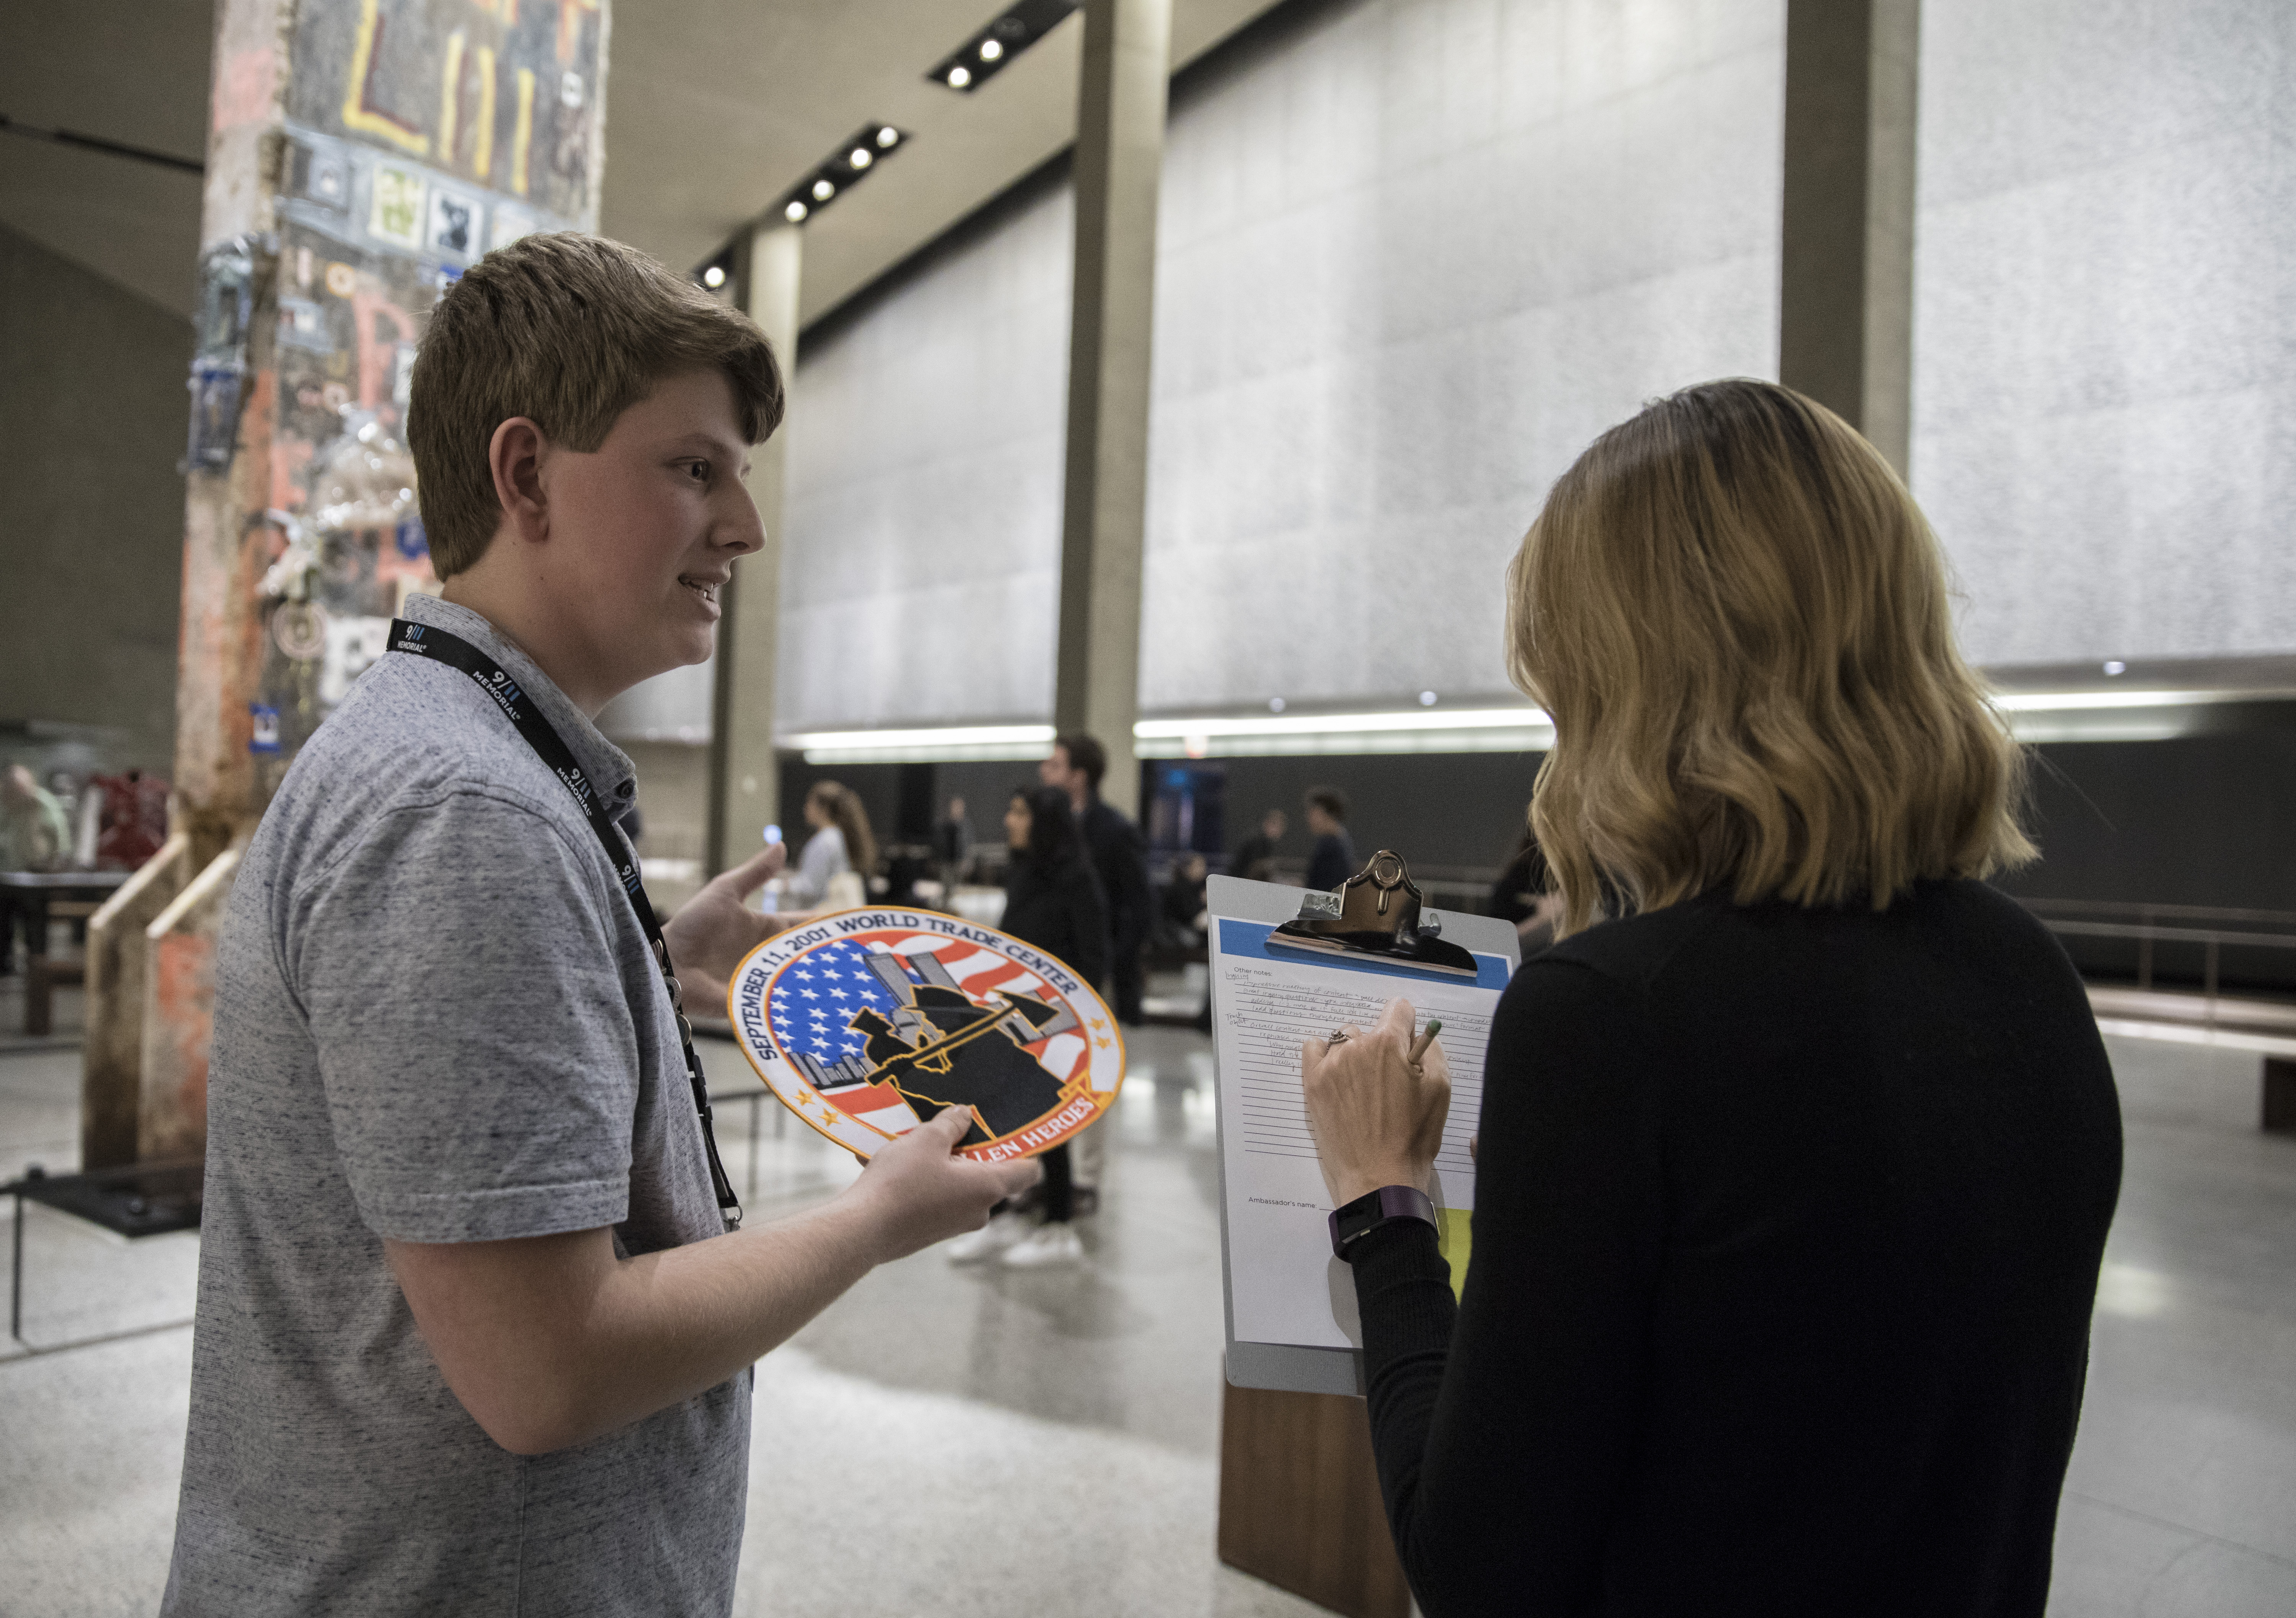 John Spade, son of 9/11 survivor and museum docent, Bill Spade, speaks to a woman with a clipboard beside the Last Column in Foundation Hall. He is holding up a large patch dedicated to the heroes of 9/11.